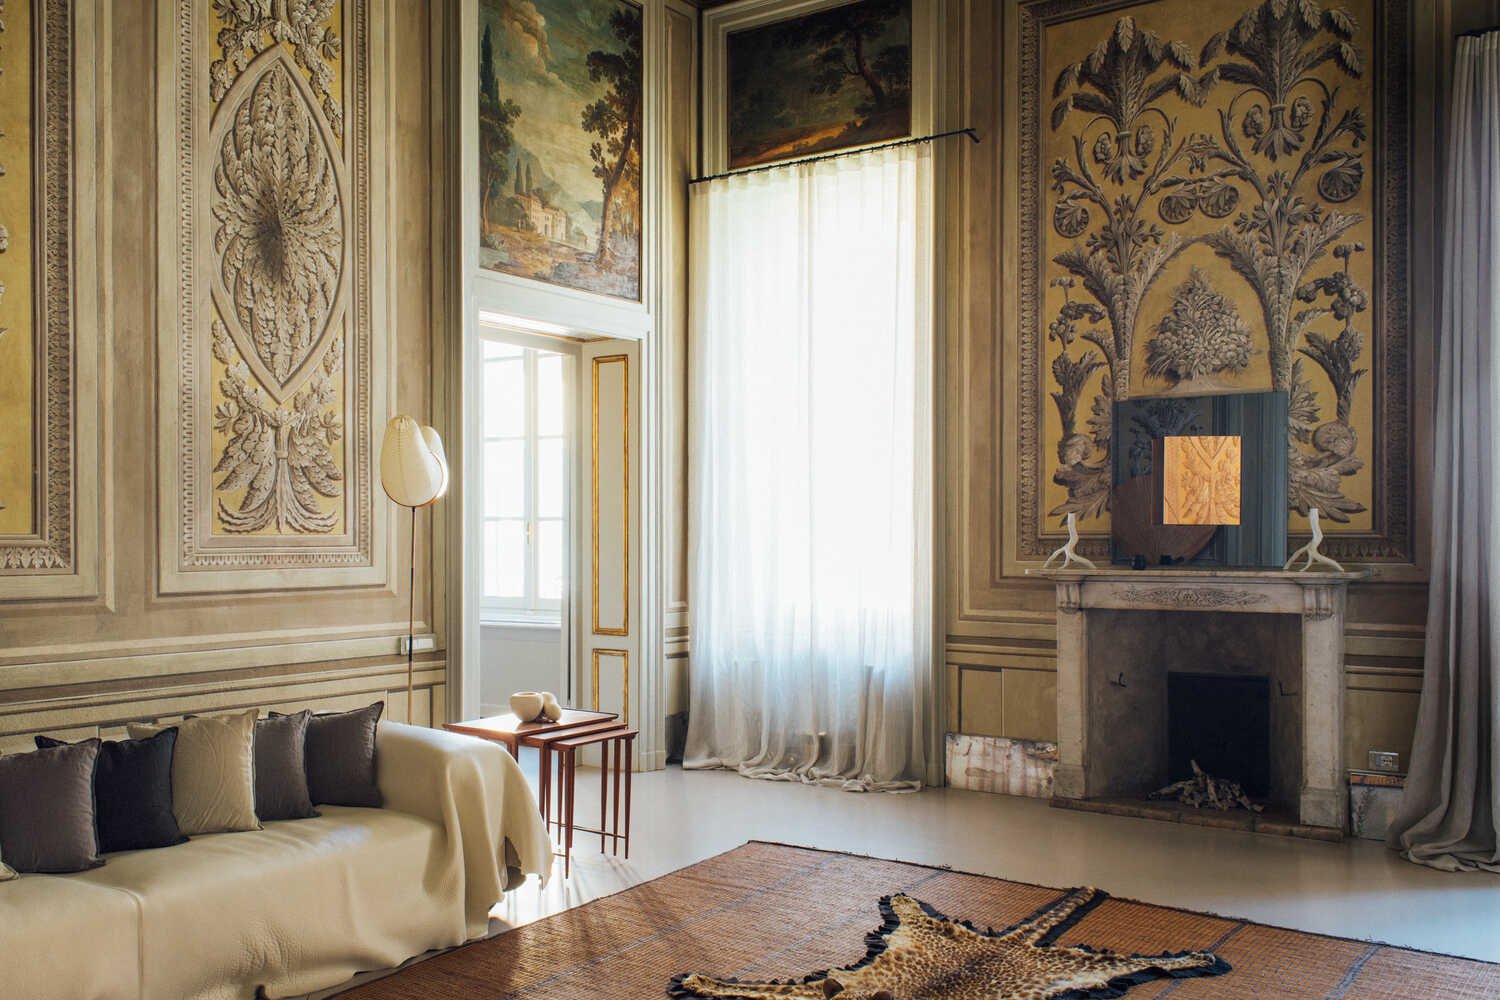 In a salon of an apartment in Brescia, Italy, renovated by the designer Paola Moretti, Pompeiian-style friezes, a leather-draped Edra Gran Khan sofa, an Akari lamp by Isamu Noguchi and a leopard skin rug made in 1935 by the Indian taxidermy firm Van Ingen & Van Ingen, atop a vintage Tuareg mat.